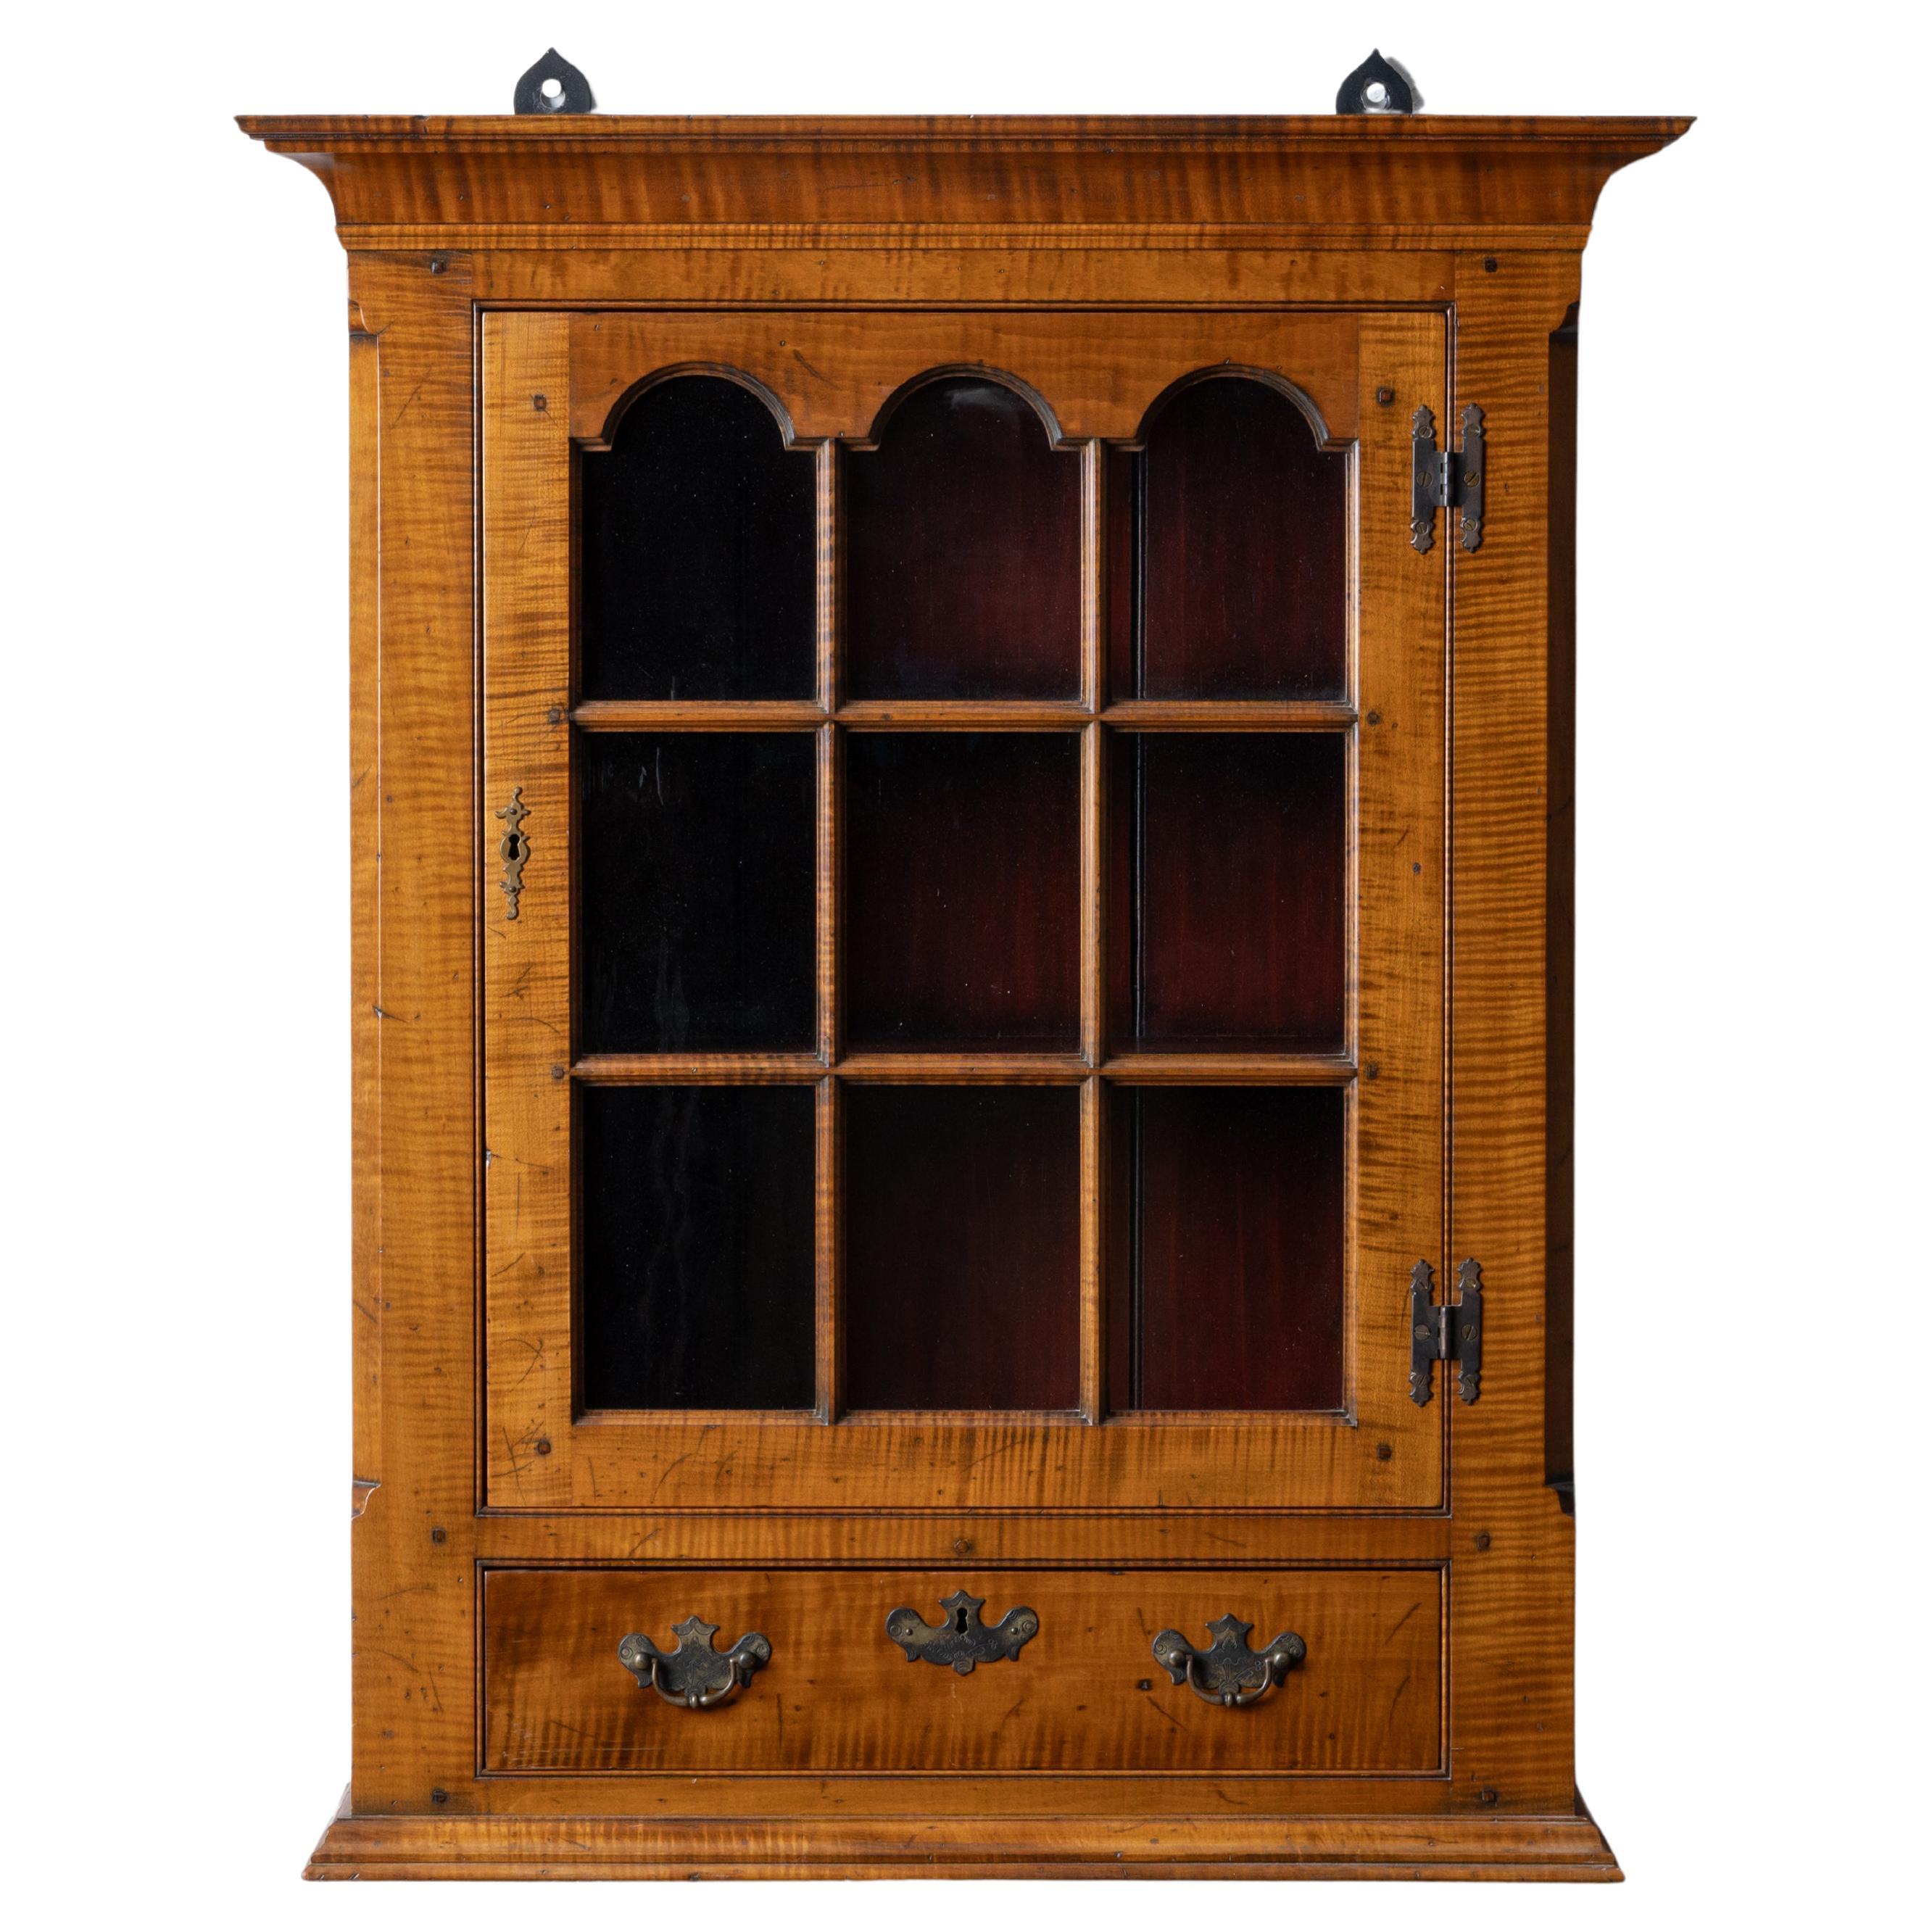 George Beshore Maple Hanging Cupboard For Sale